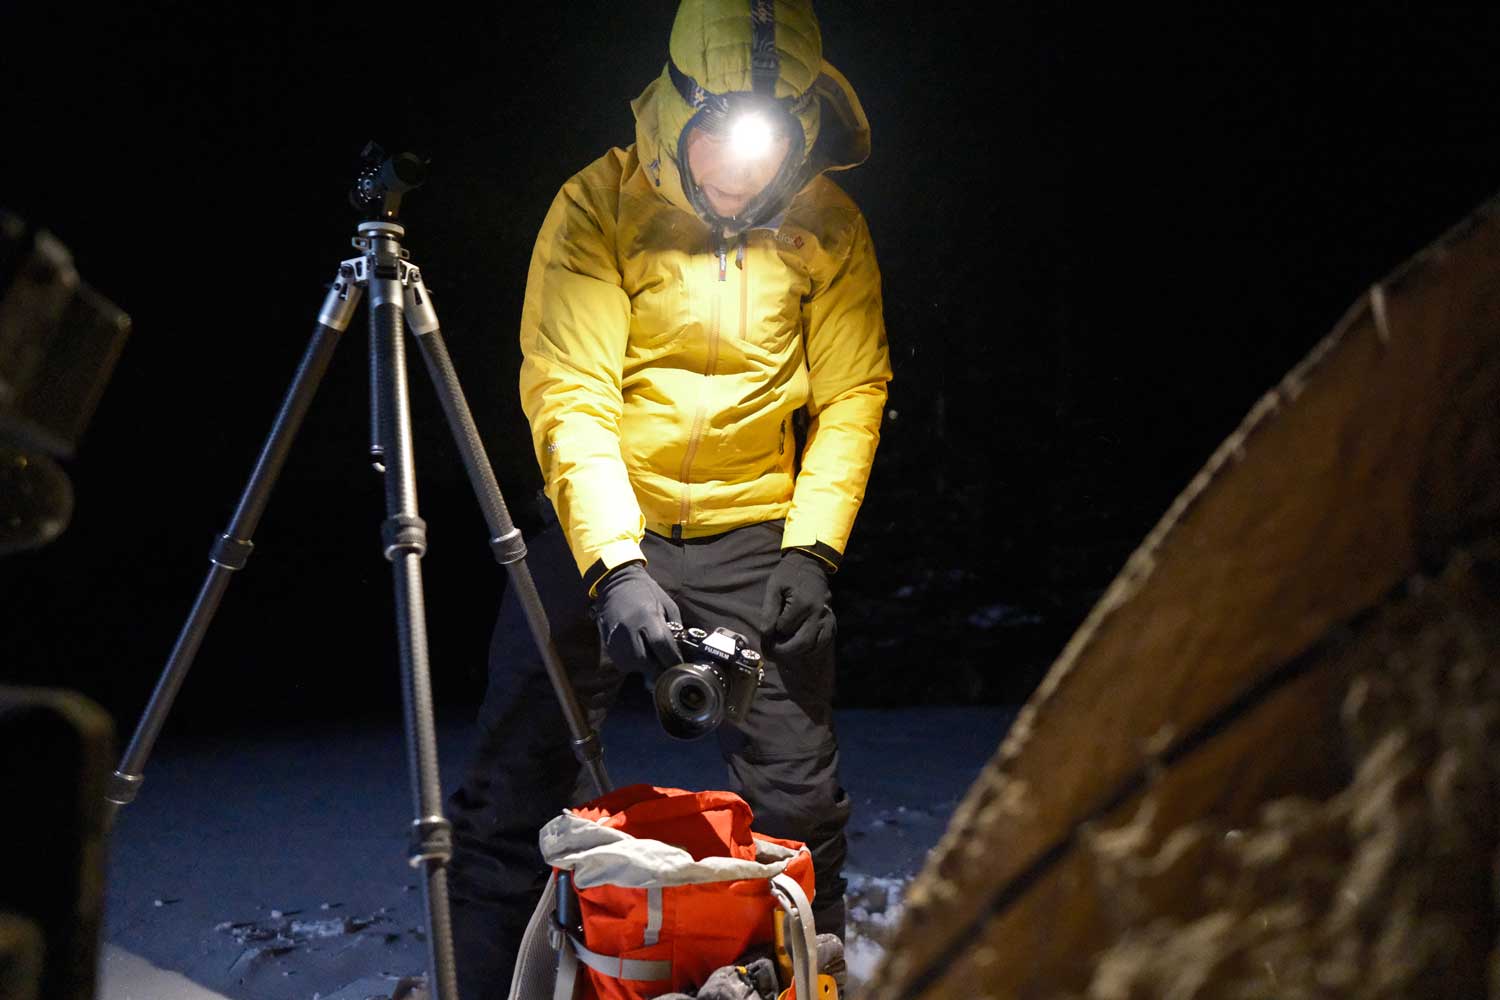 Seth K Hughes wearing yellow jacket and hood with head torch on holding a FUJIFILM X-T5 camera outside a tent next to a tripod in the snow at night